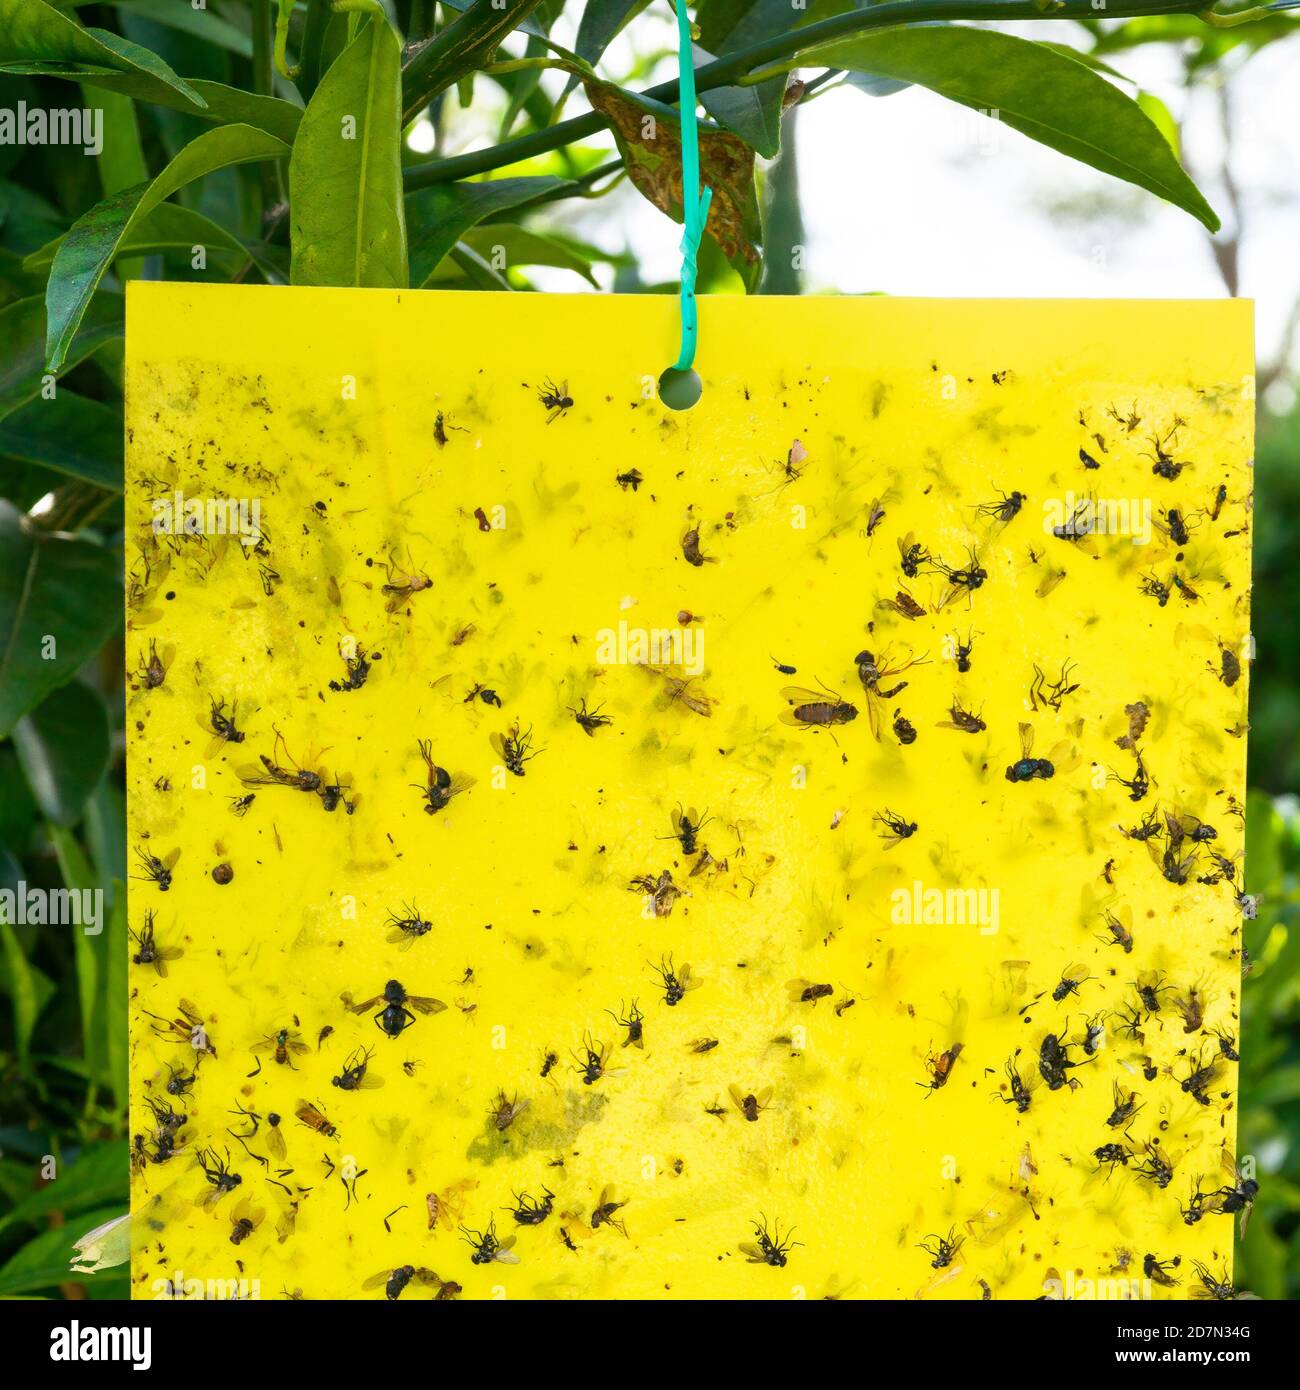 Yellow sticky fly paper with bugs catched acting as non chemical garden protection. Stock Photo